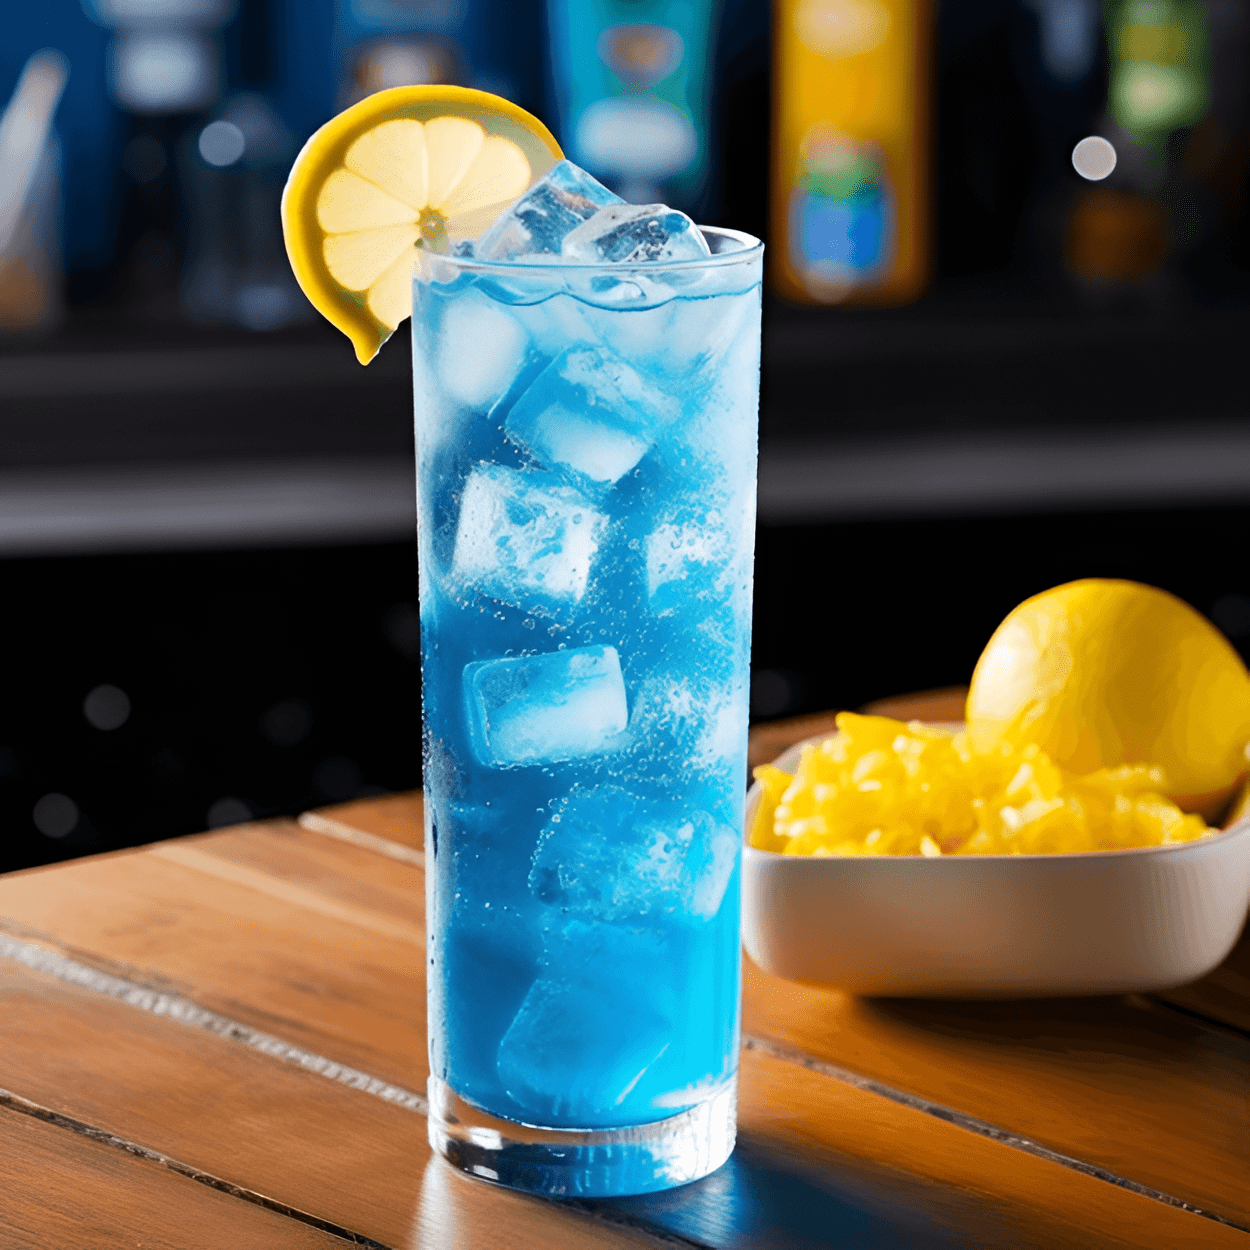 Blue Motorcycle Cocktail Recipe - The Blue Motorcycle is a strong, potent cocktail with a sweet and sour taste. The sweetness comes from the blue curacao and sweet and sour mix, while the sourness is provided by the lemon juice. The vodka, tequila, rum, and gin give it a strong alcoholic kick.